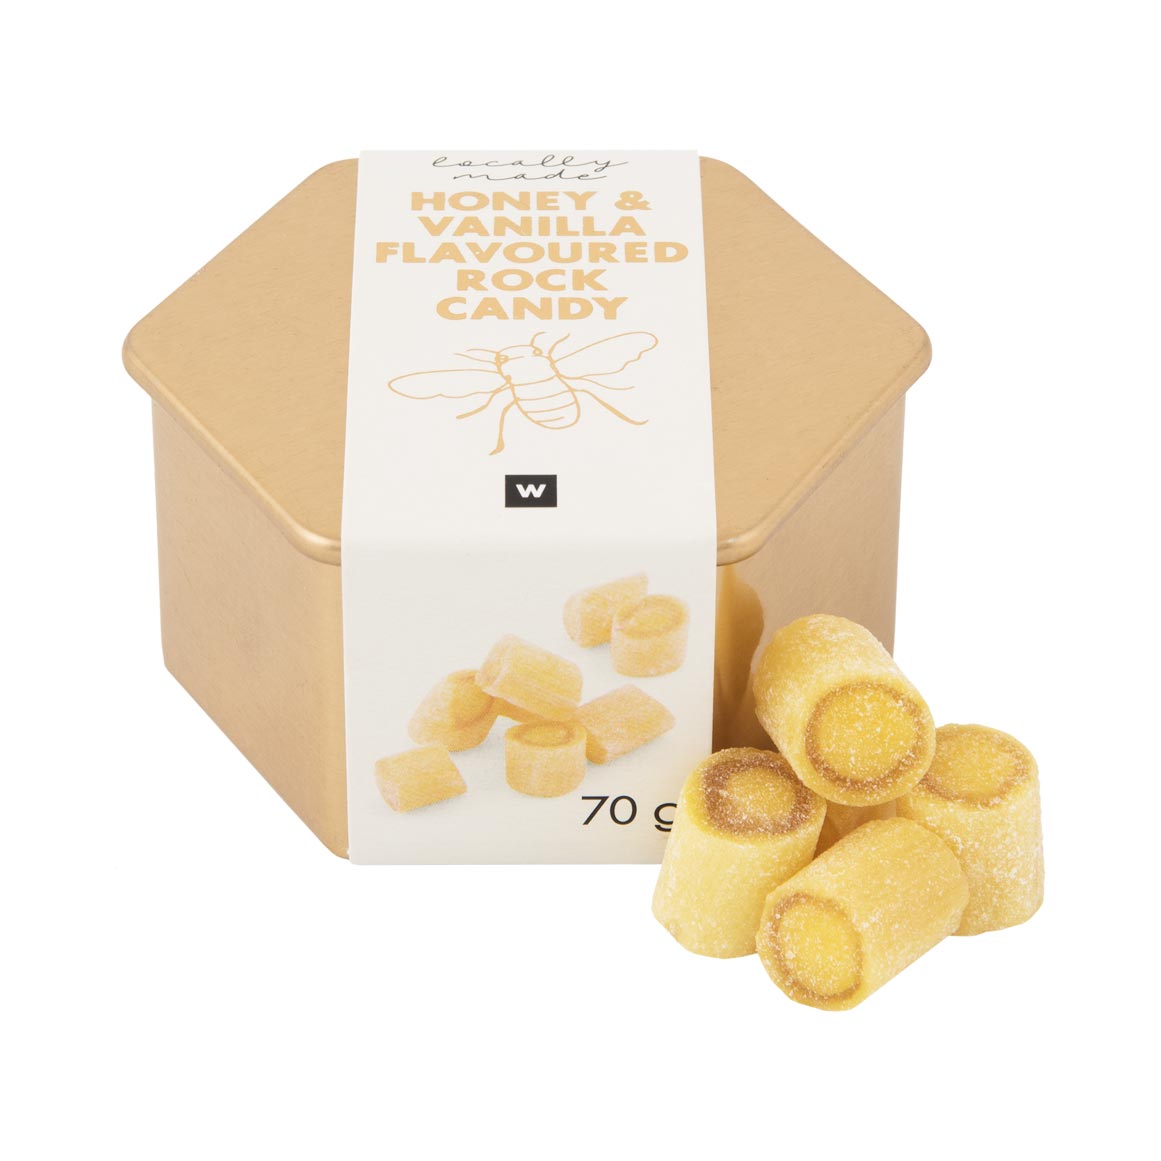 Honey & Vanilla Flavoured Rock Candy 70g | Woolworths.co.za